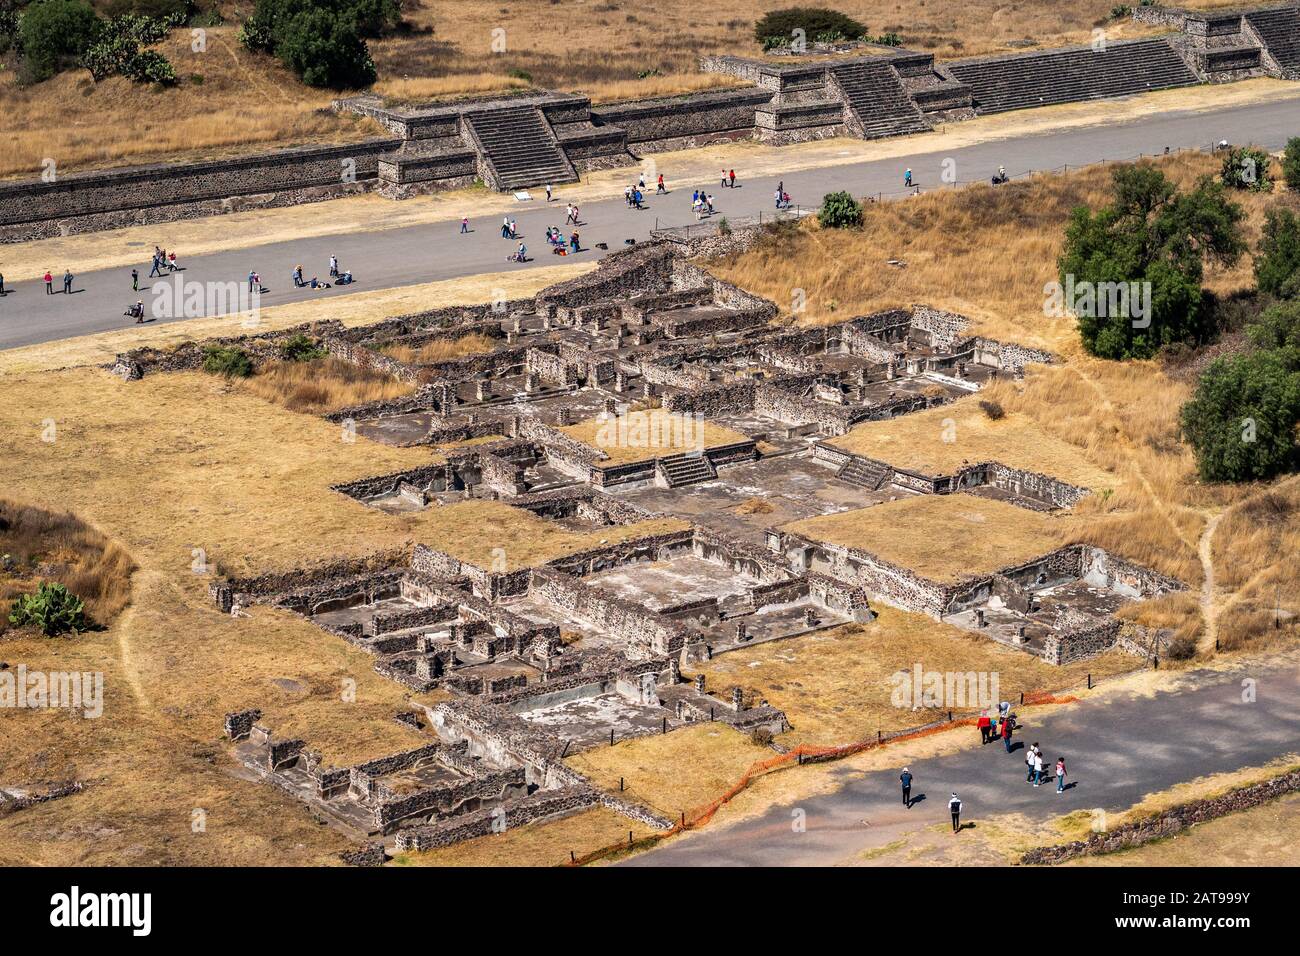 Ruins along the Avenue of the Dead at the ancient Aztec city of Teotihuacan, near Mexico City, Mexico. Stock Photo